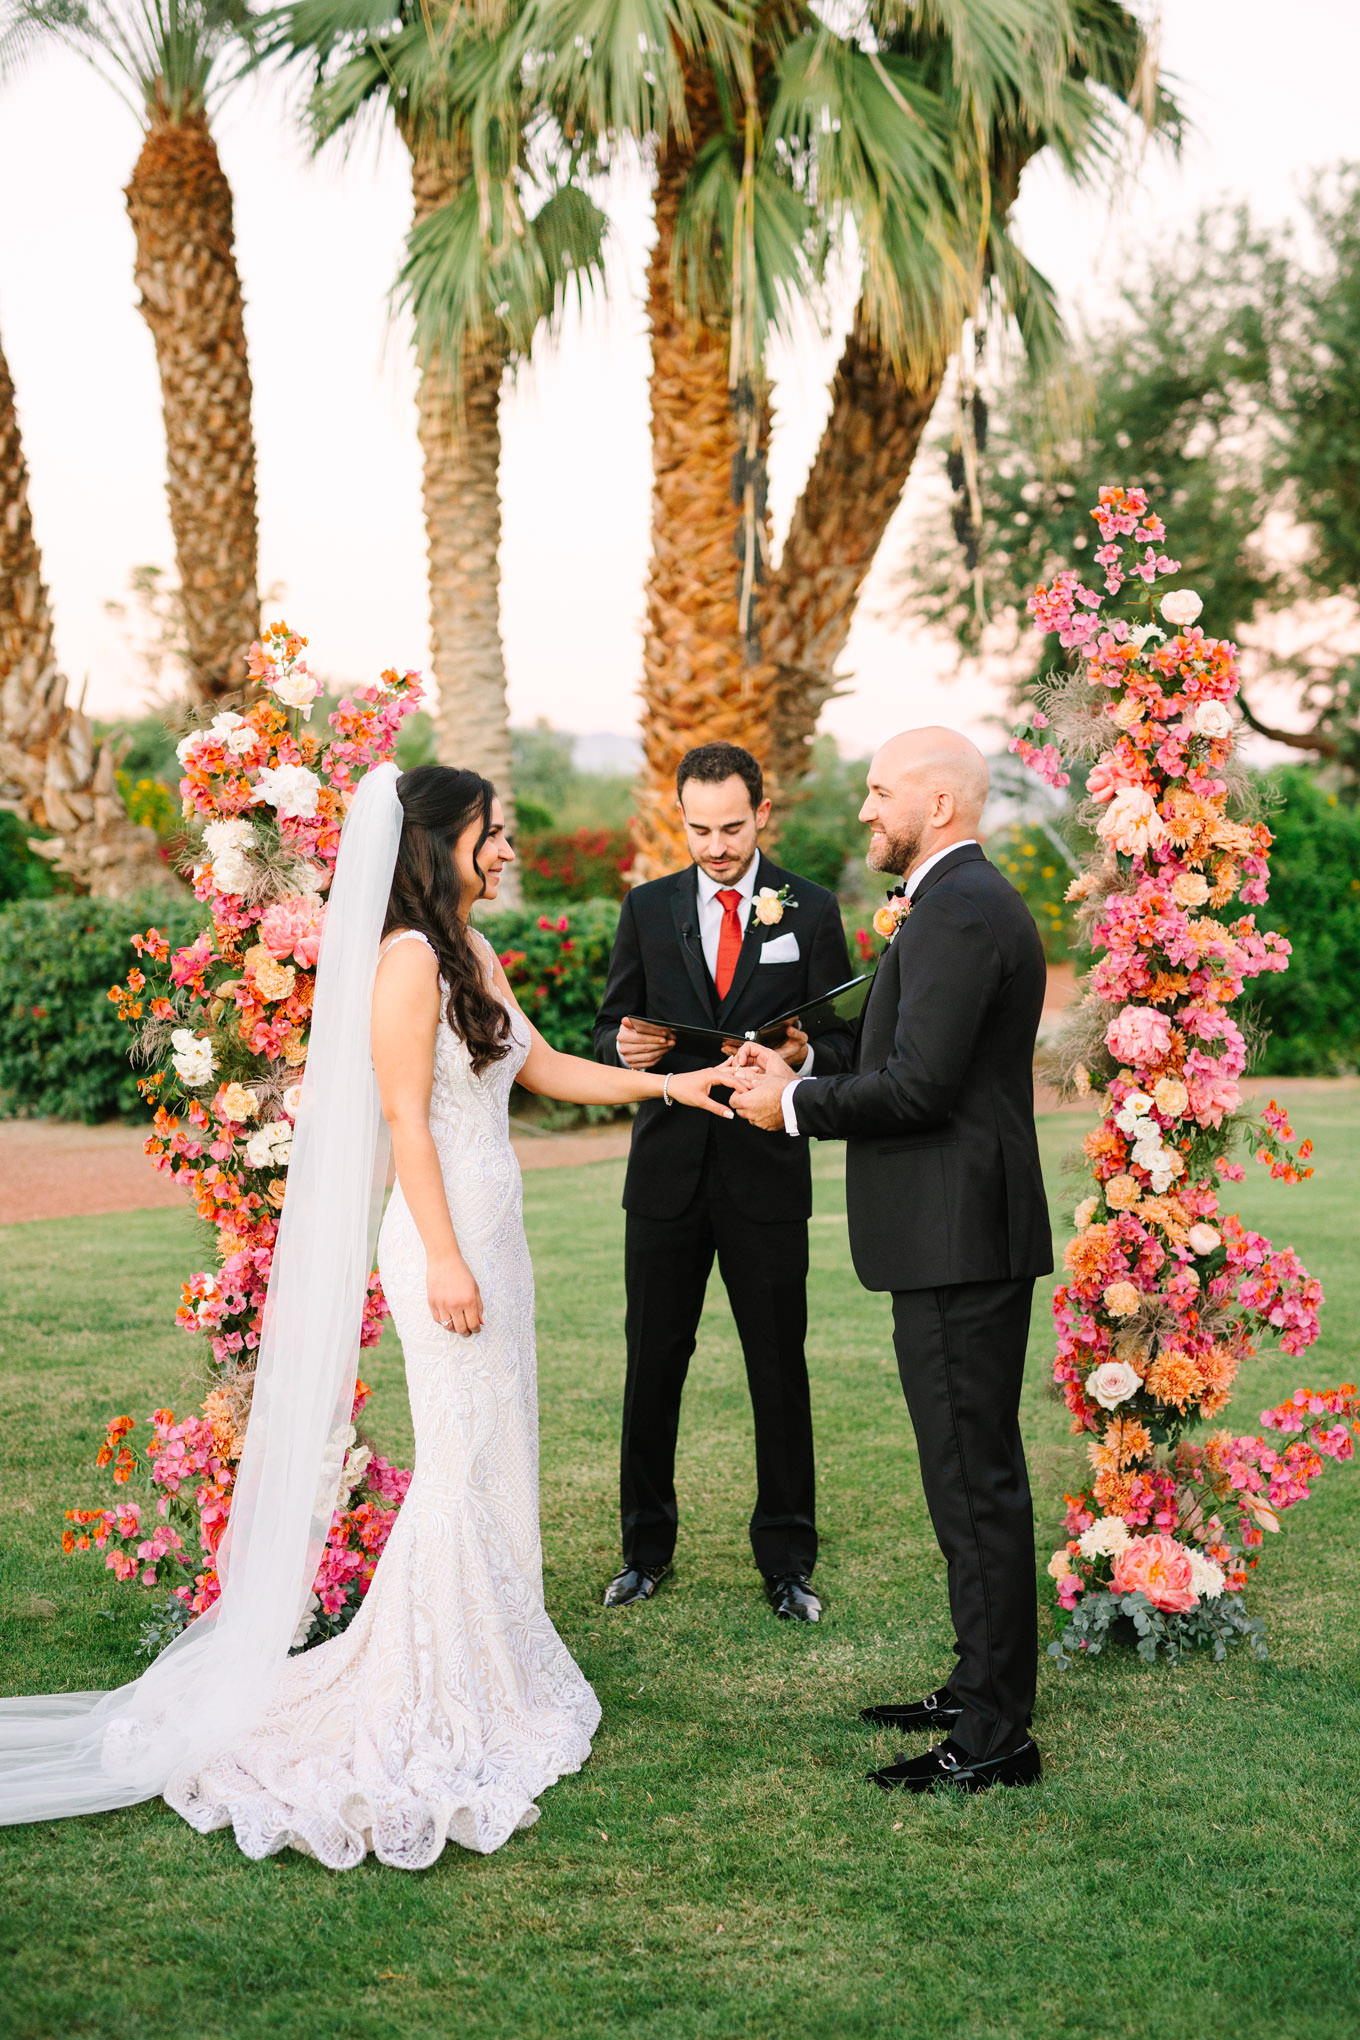 Couple exchanging rings | Pink Bougainvillea Estate wedding | Colorful LA wedding photography | #bougainvilleaestate #palmspringswedding #palmspringsweddingvenue #palmspringsphotographer Source: Mary Costa Photography | Los Angeles